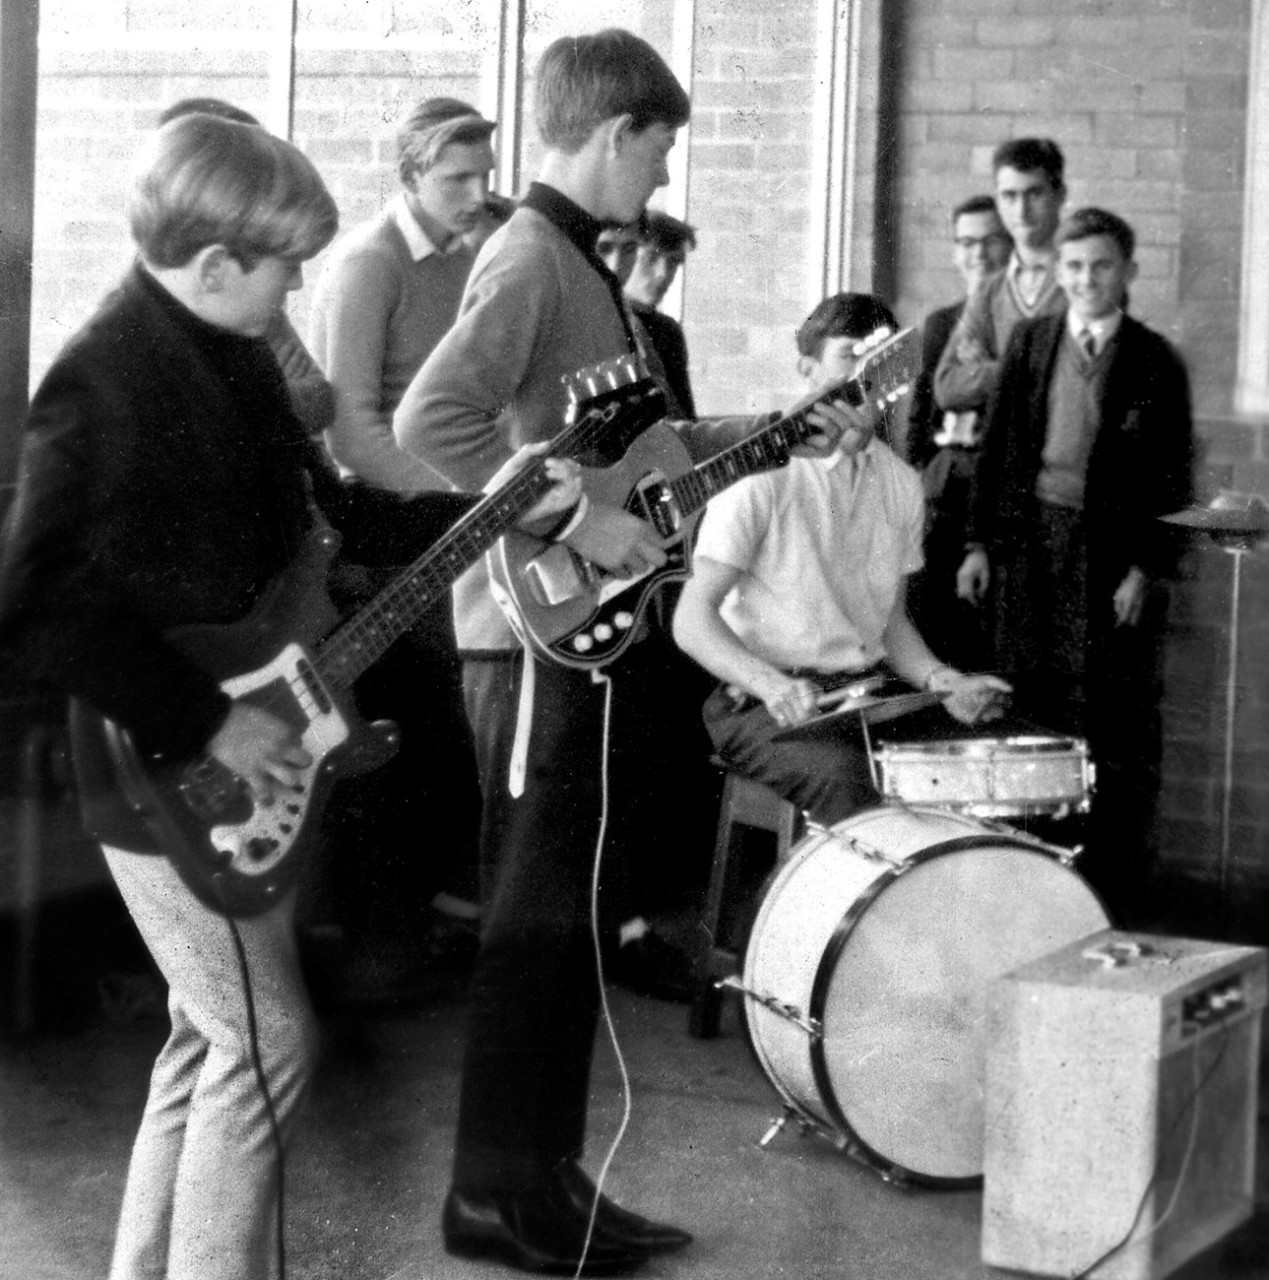 A black and white photograph of the CHHS band playing a small concert at school in 1964. Male bassist and male guitarist are in the foreground with drummer in the middle ground. 8 male students in school uniform are in the background.